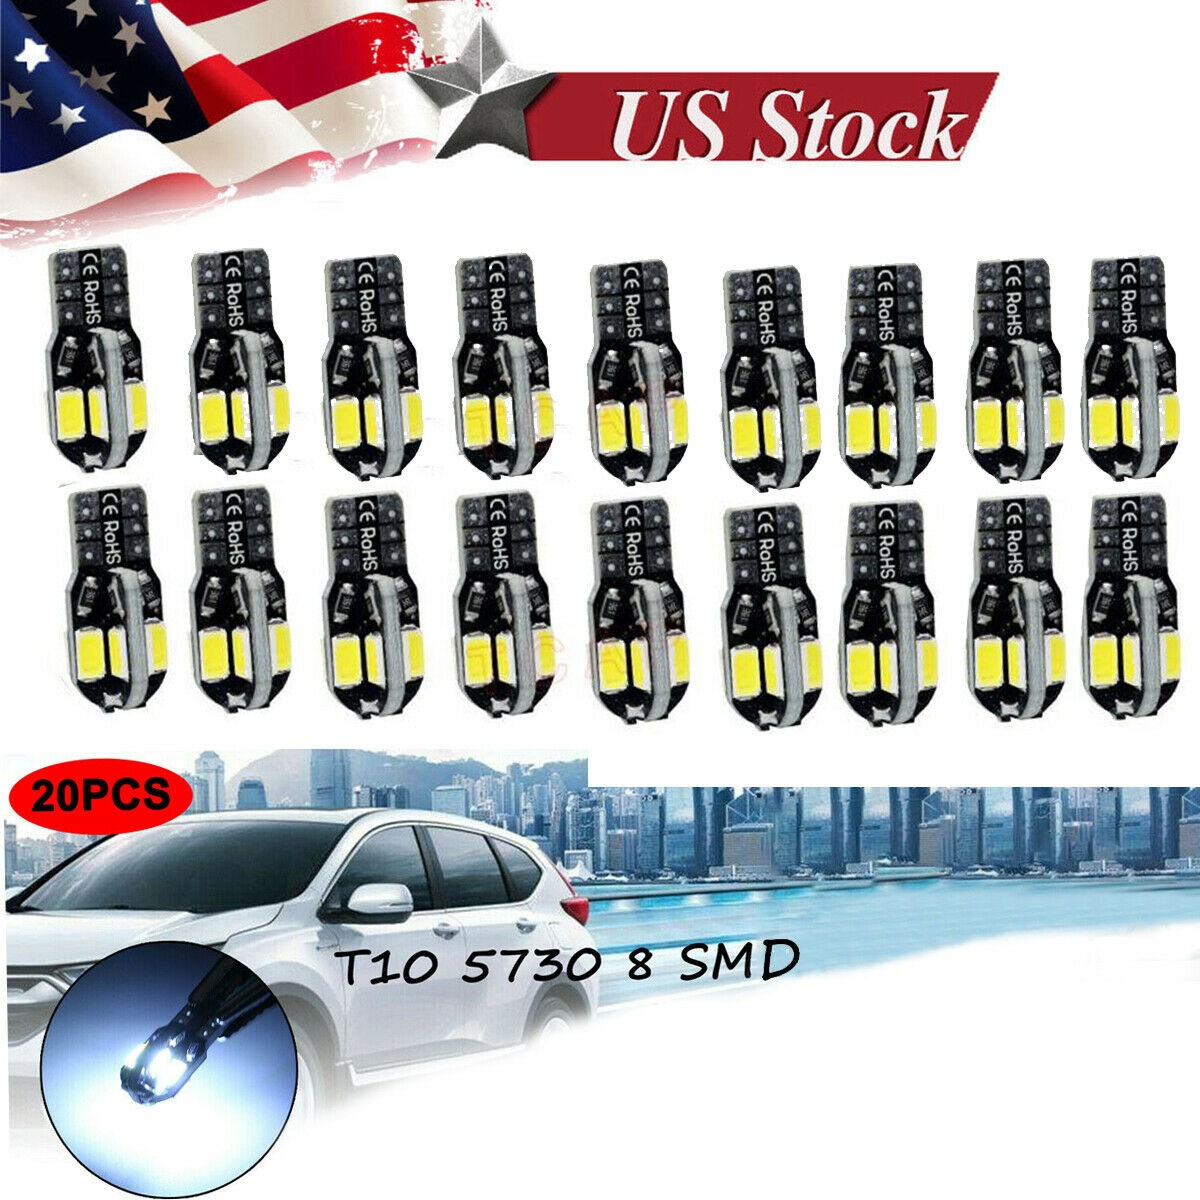 Canbus T10 194 168 W5W 5730 8 LED SMD White Car Side Wedge Light Lamp Bulb